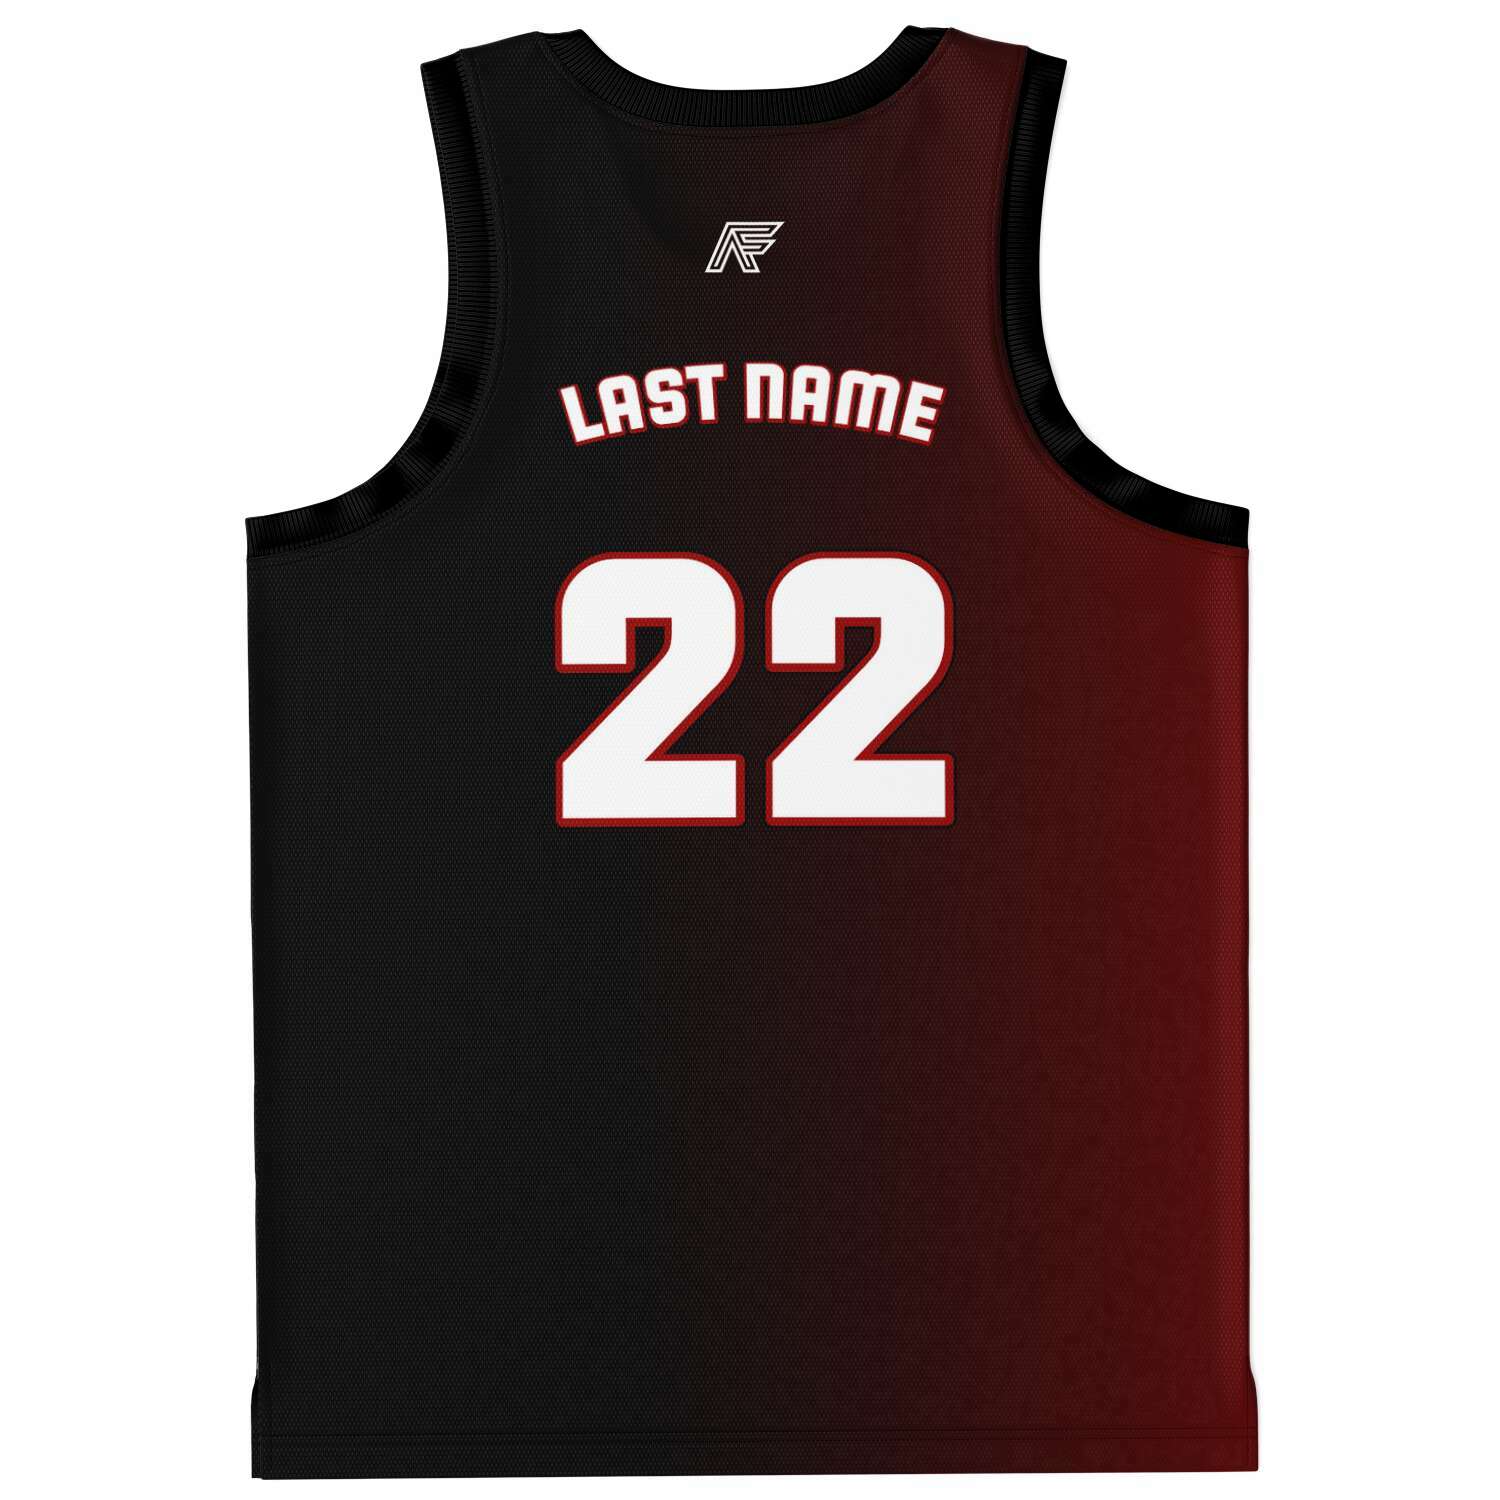 Customizable Garden State Jersey (Free Shipping Included)